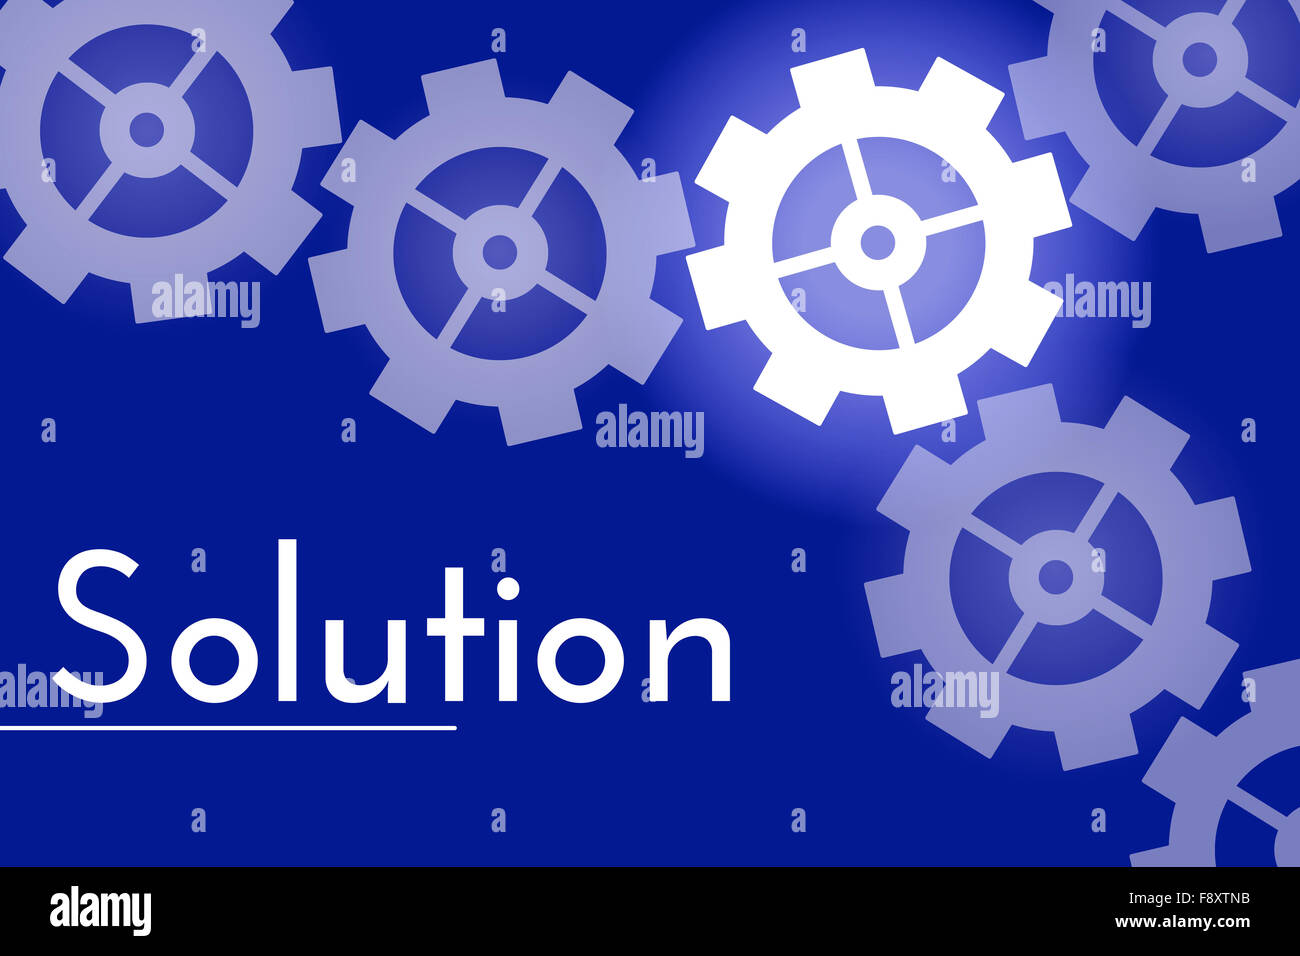 Solution concept with white gears on blue background Stock Photo